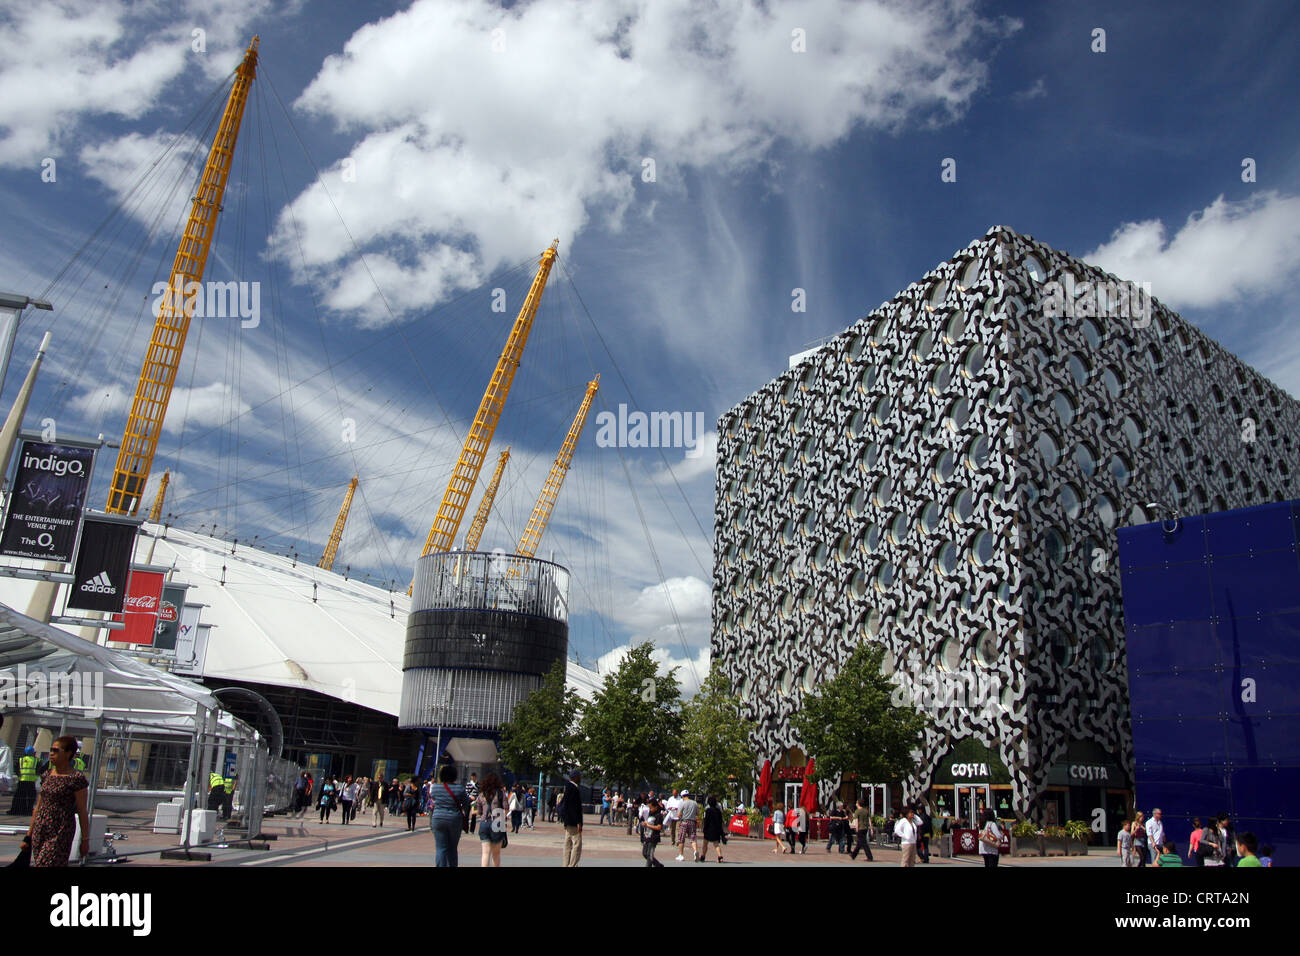 The O2 North Greenwich arena in London Stock Photo